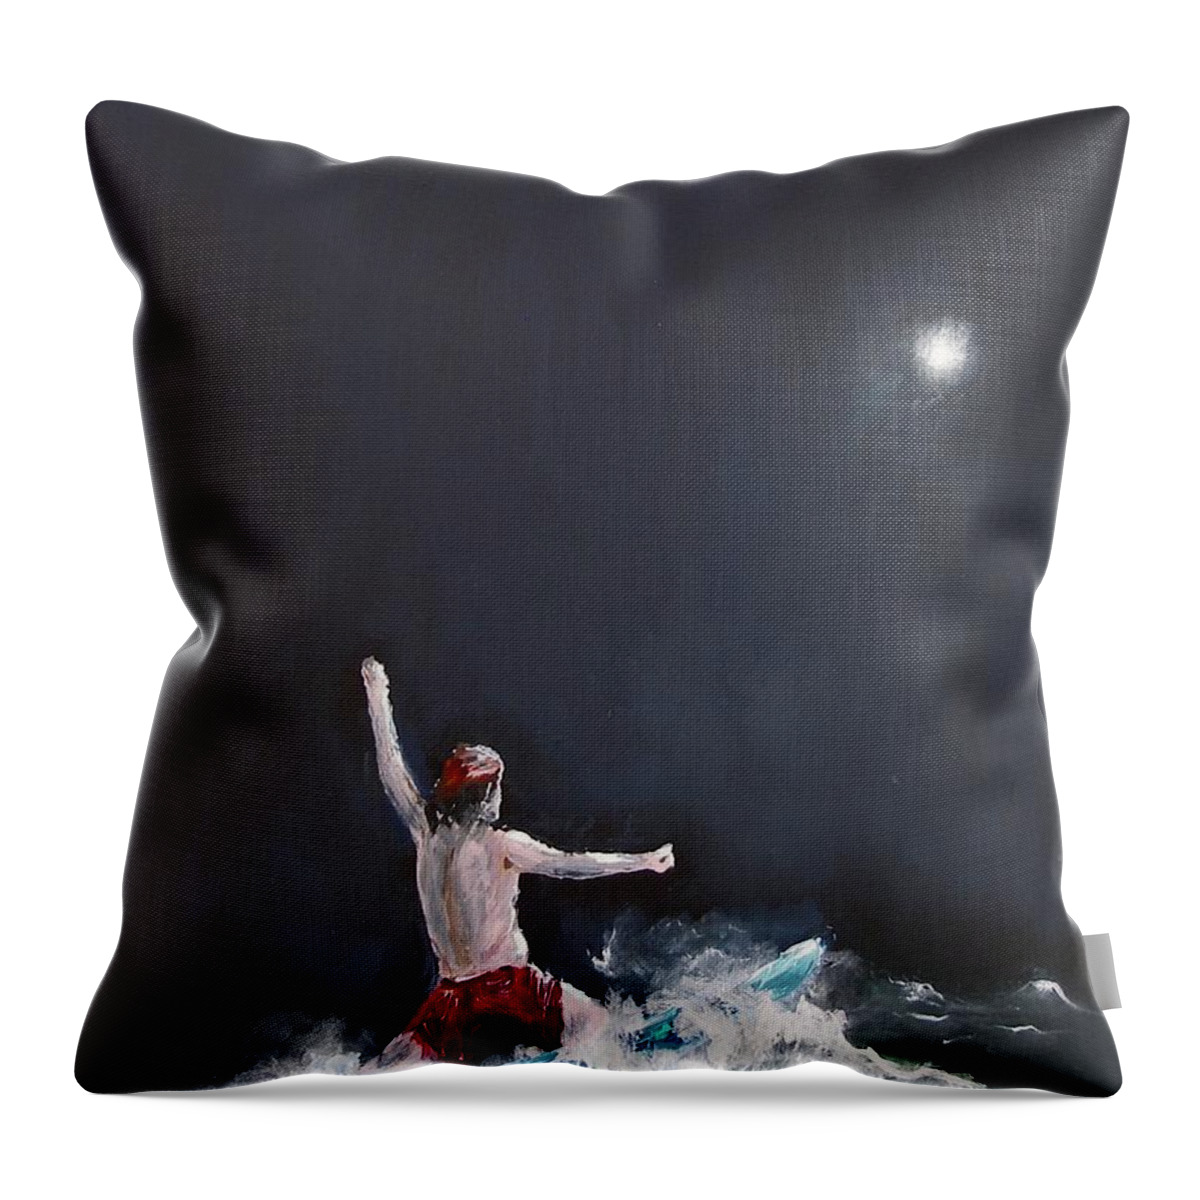 Night Life Ocean Wave Night Sport Ride Between Wave Moon Dark Play Surfing Water Seascape Sea Ocean Painting Acrylic Red Man Pleasure Light Shore Beach Throw Pillow featuring the painting Night Life by Miroslaw Chelchowski